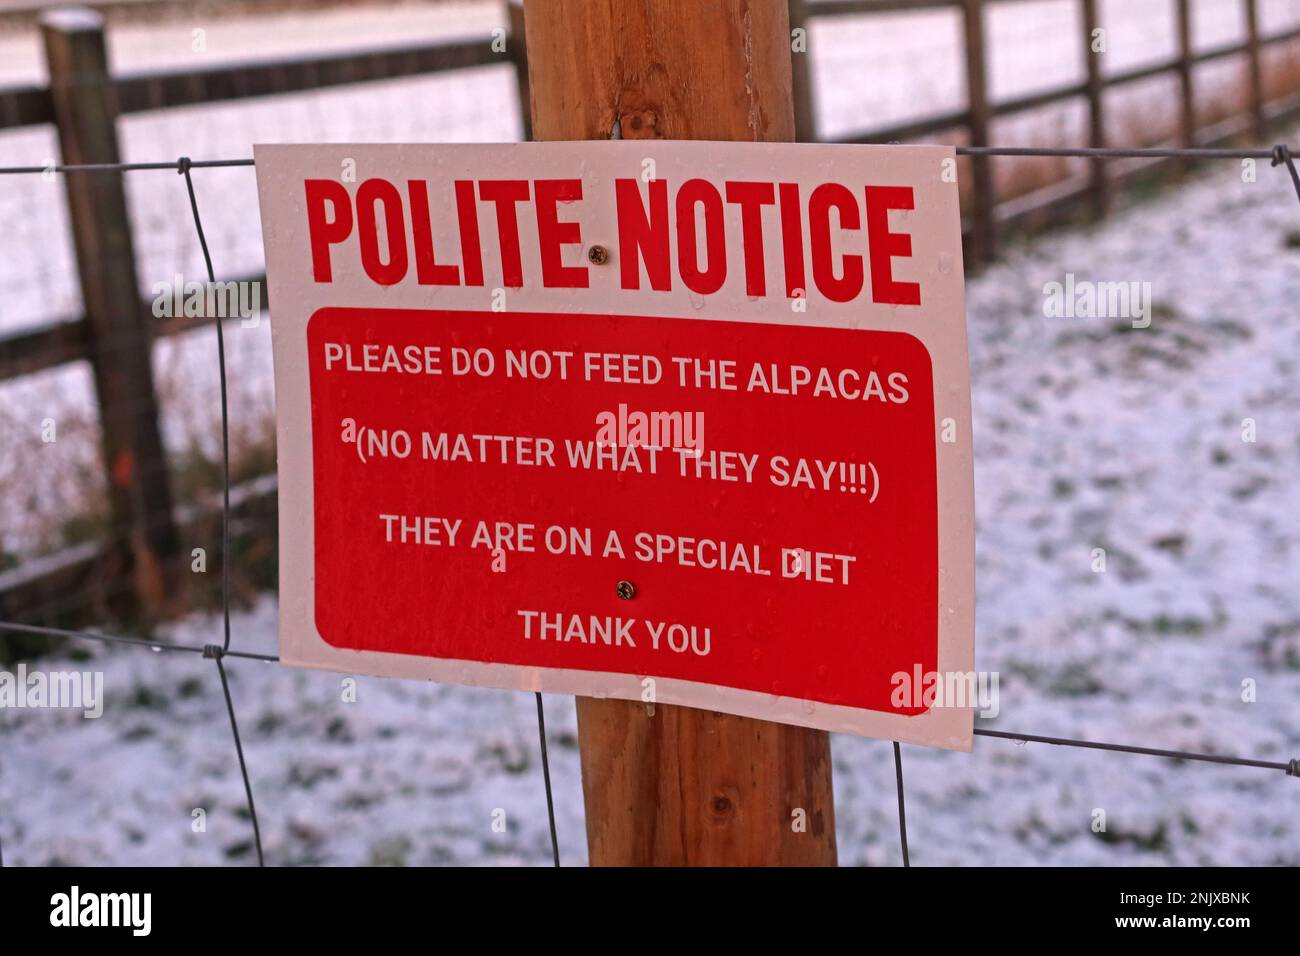 Rural farmers diversifying into keeping alpacas, Polite Notice do not feed the alpacas, no matter what they say, They are on a special diet Stock Photo